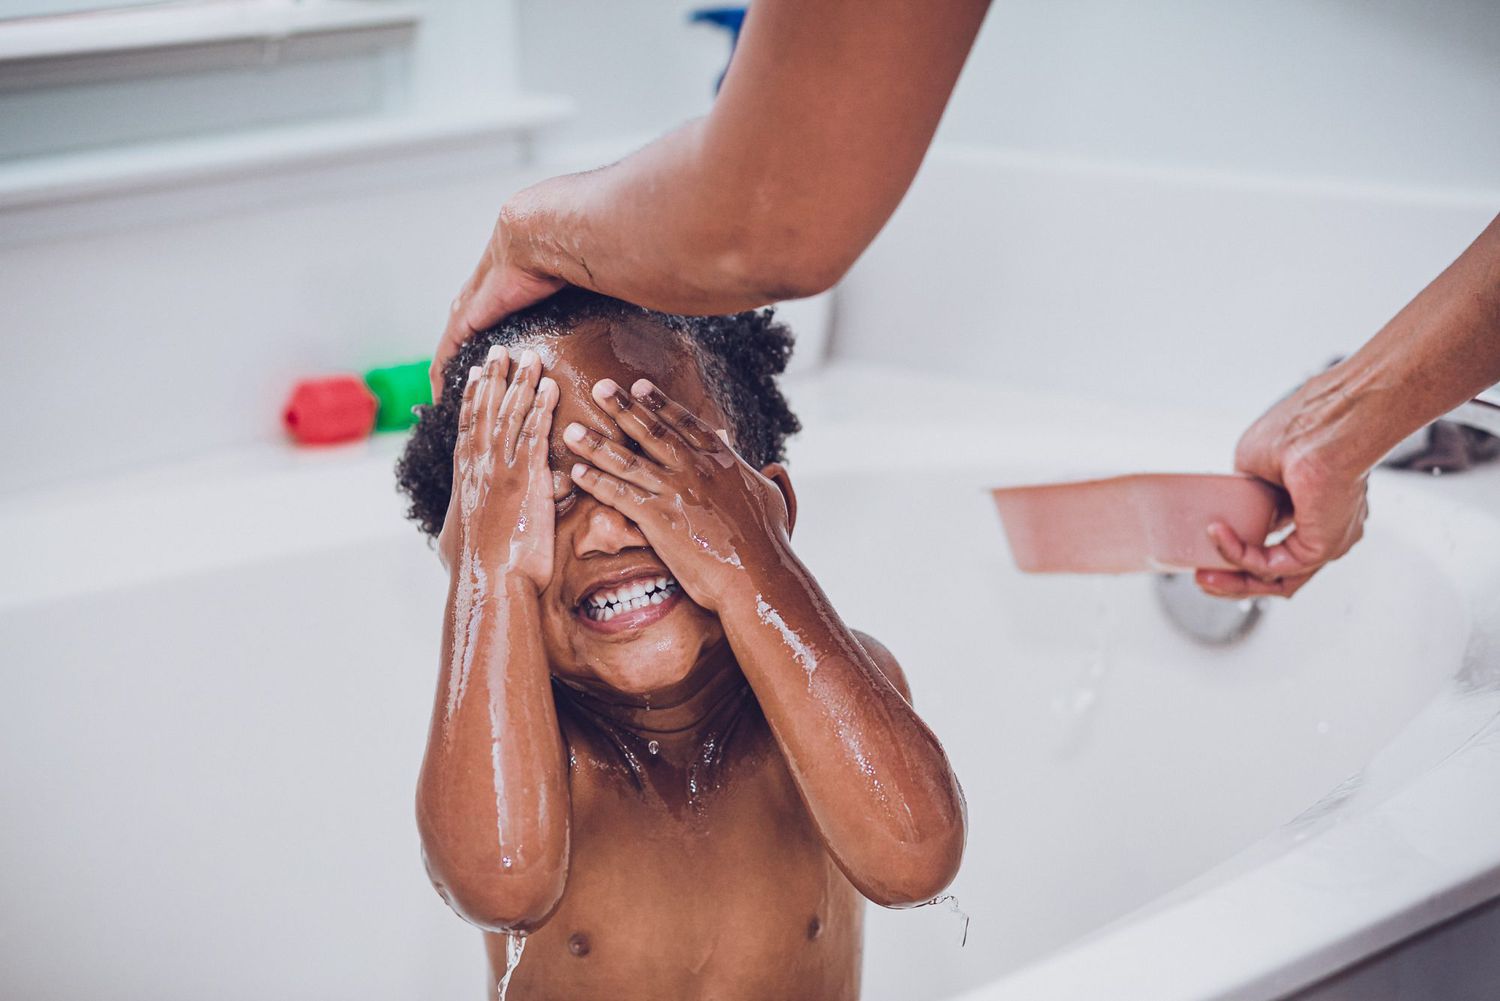 An image of Coleman with his hands over his face getting his hair washed.